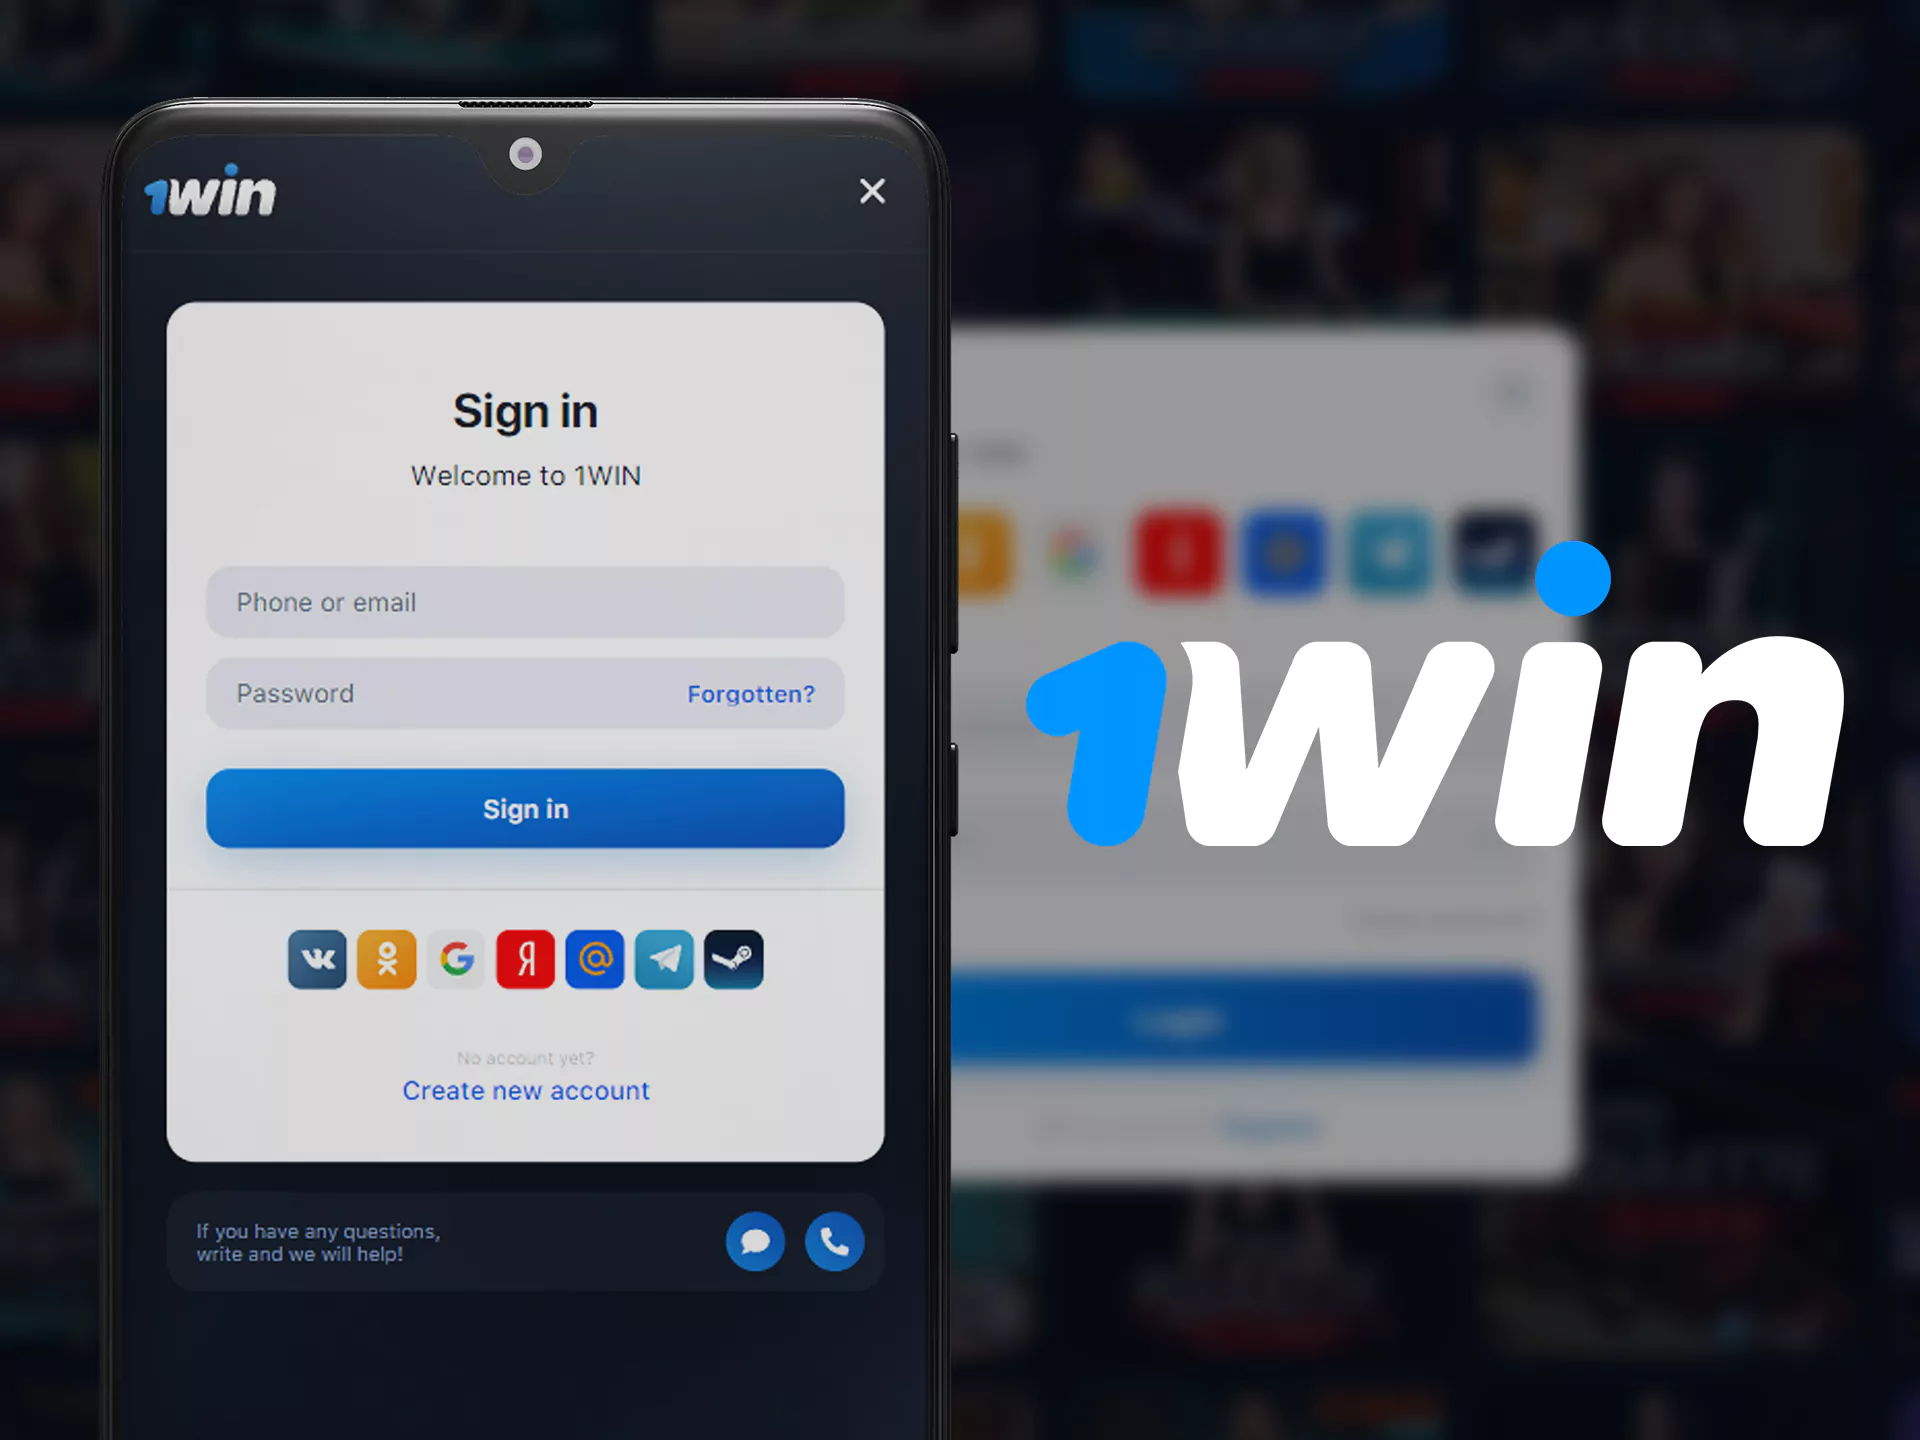 log in at 1win website for start betting.